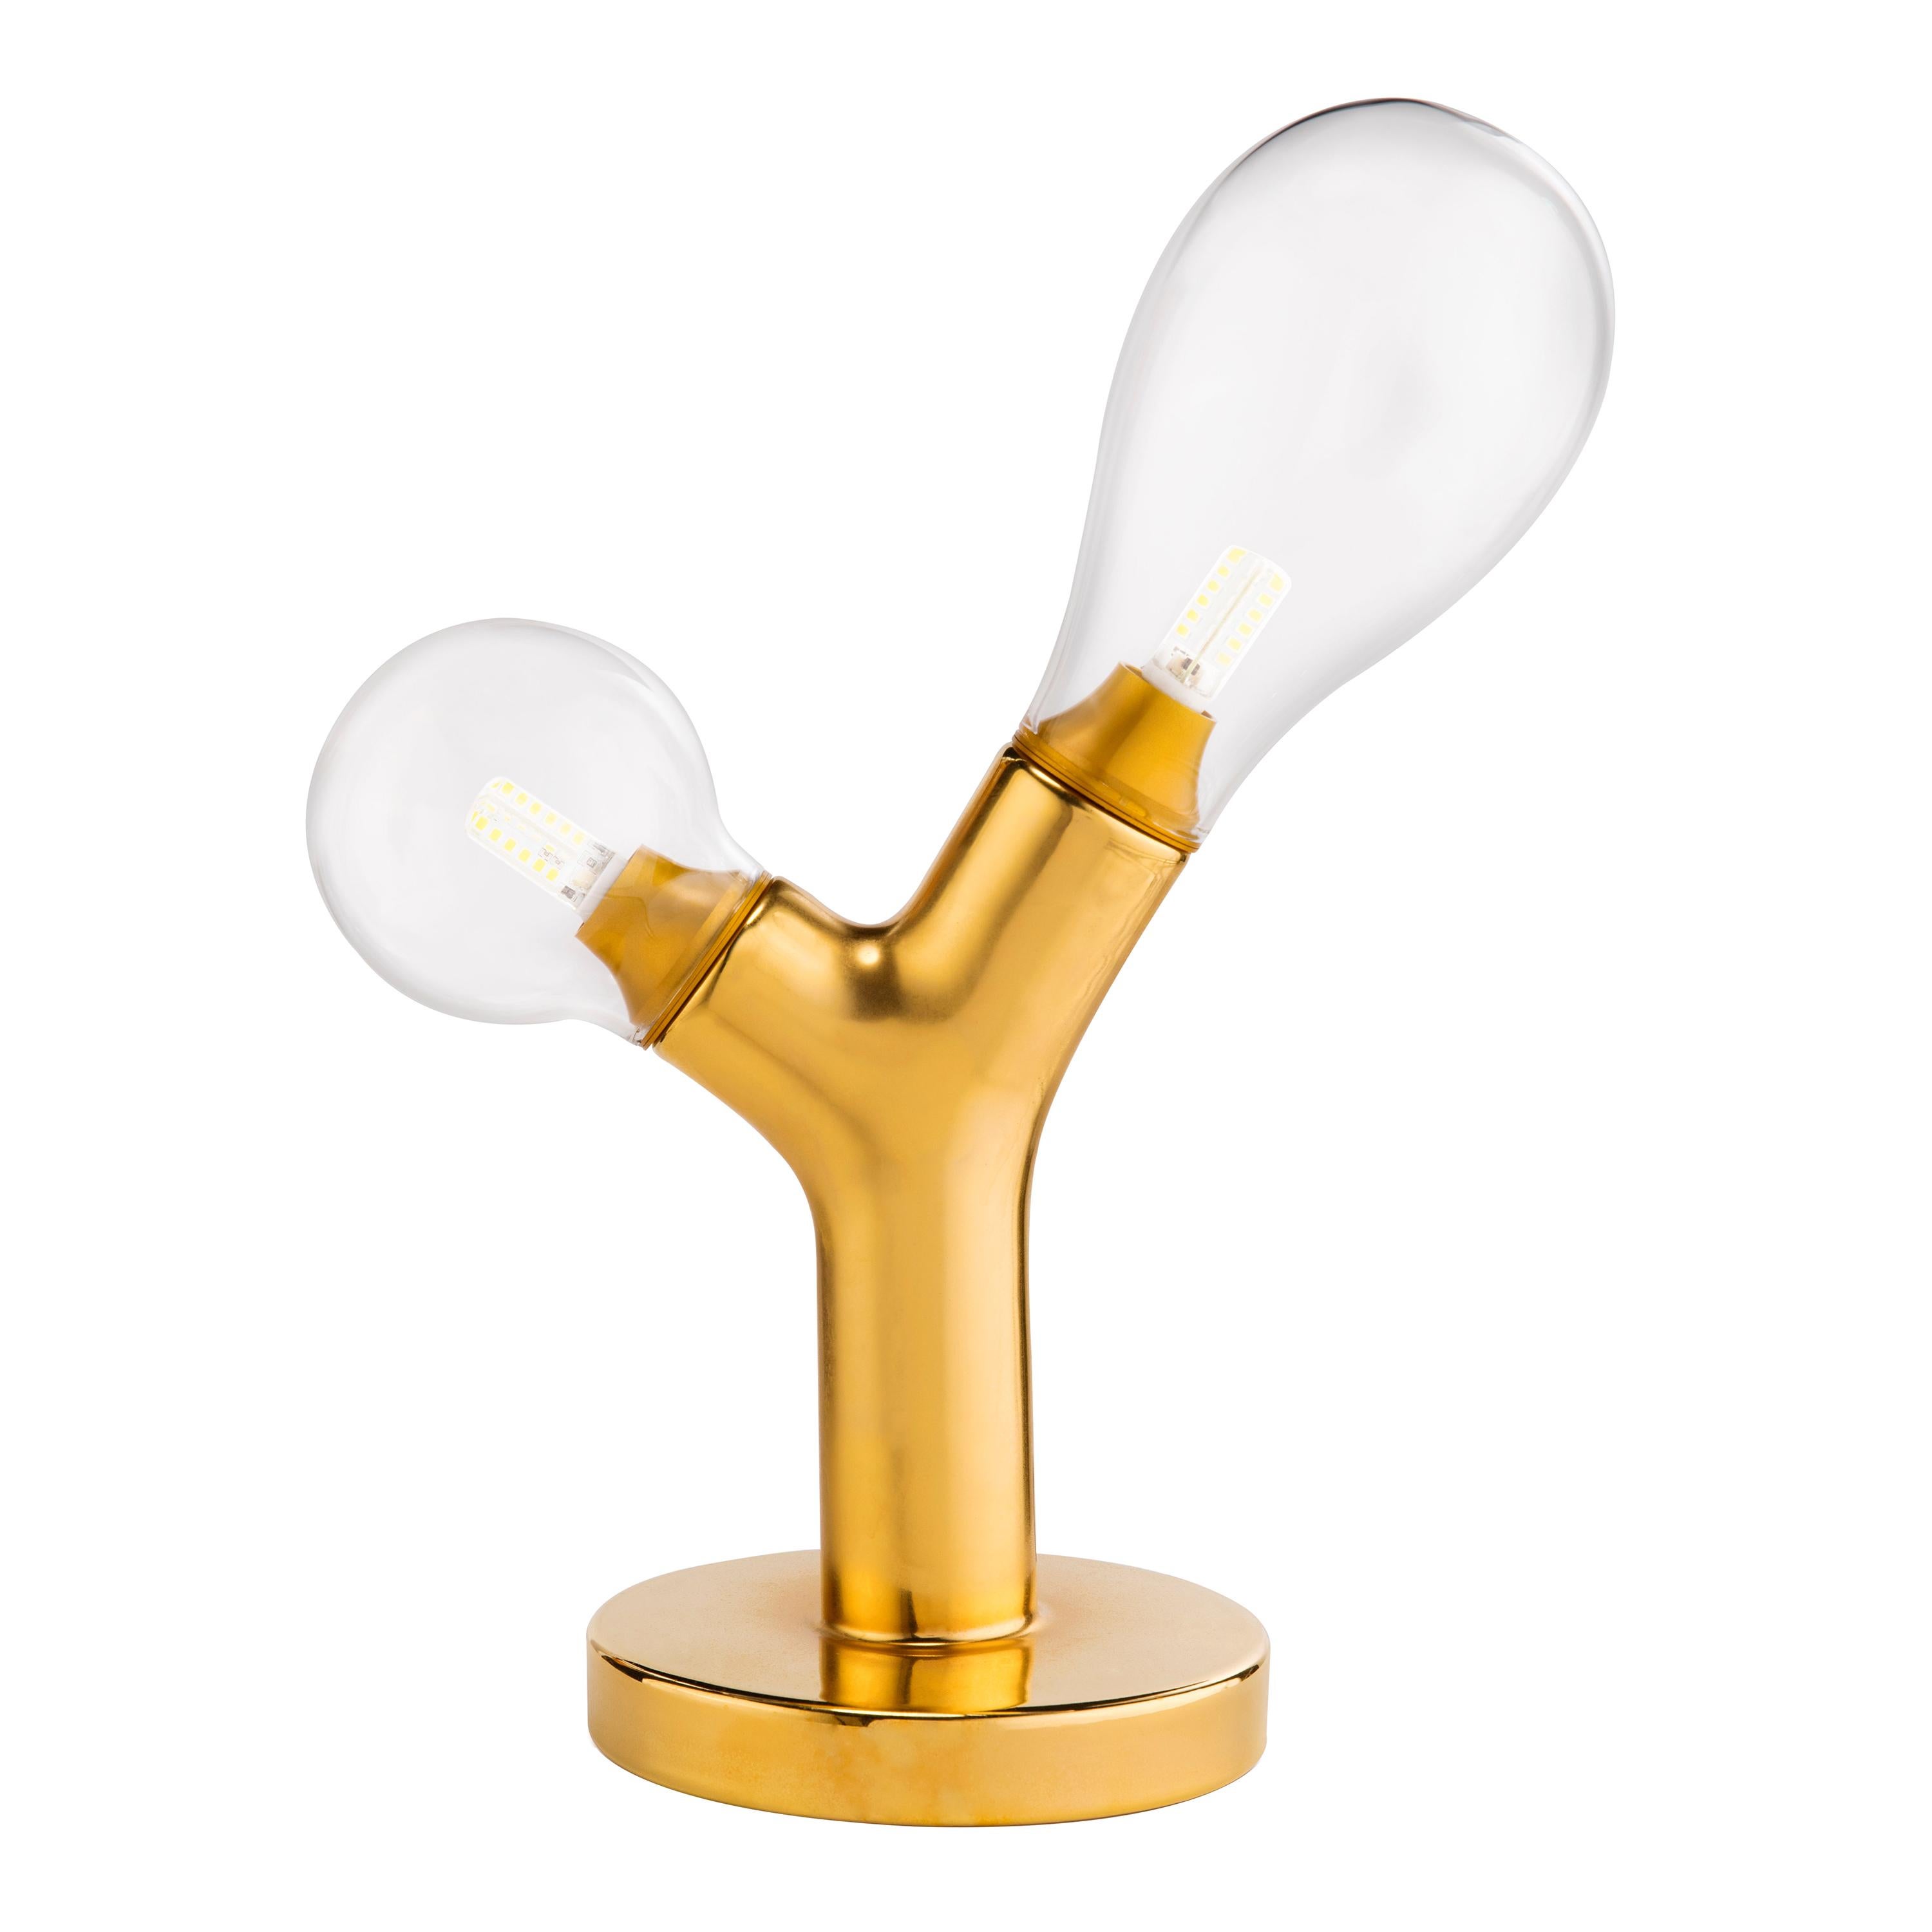 The Two Bulb Gold Plated Murano Glass, Two Light Bulb Table Lamp